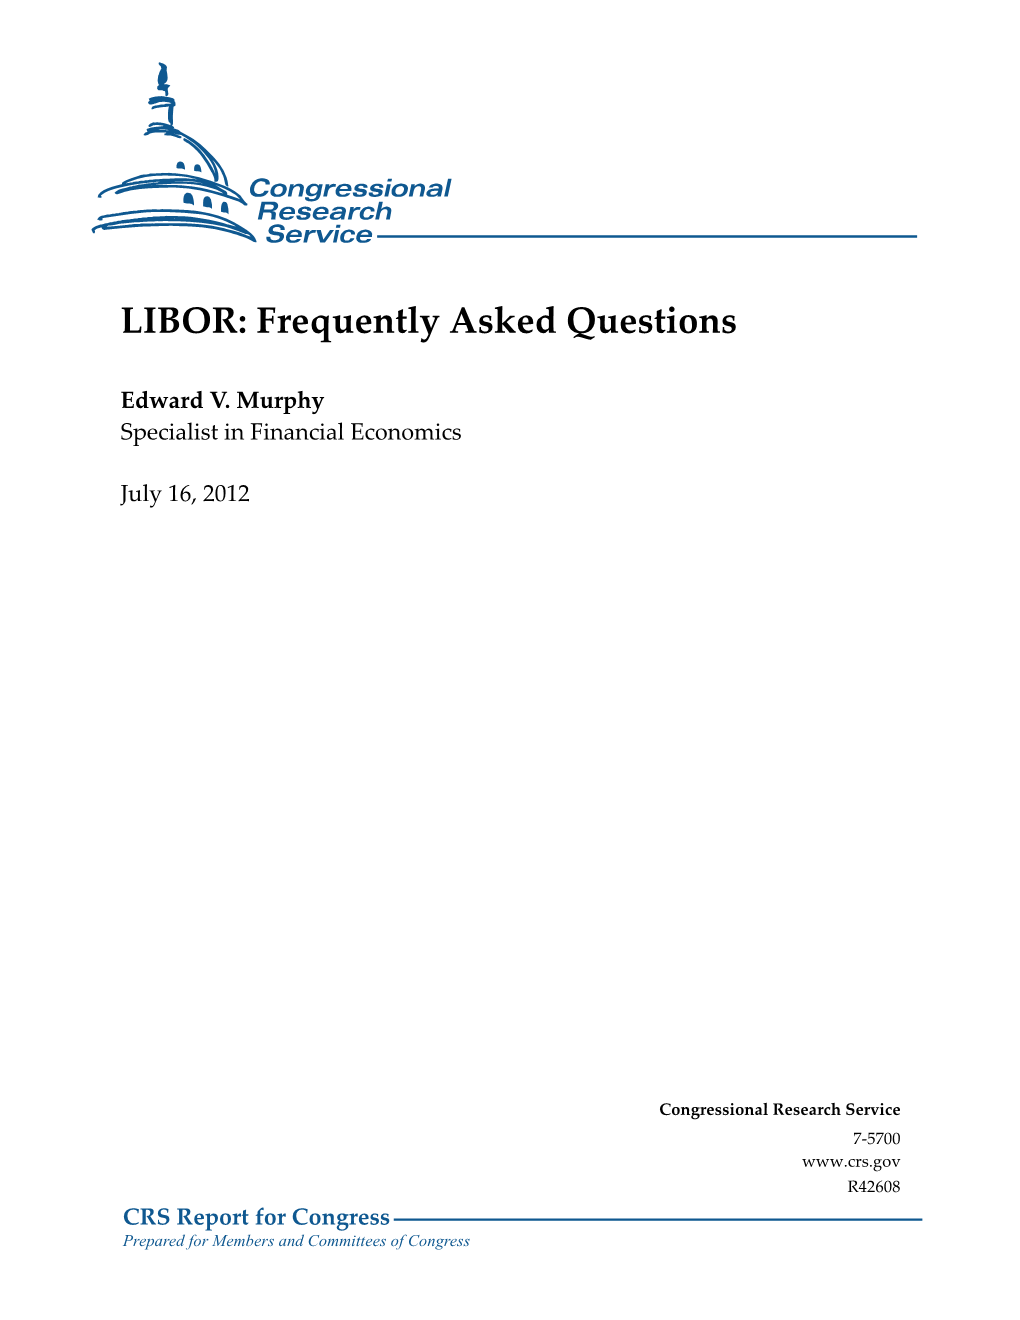 LIBOR: Frequently Asked Questions